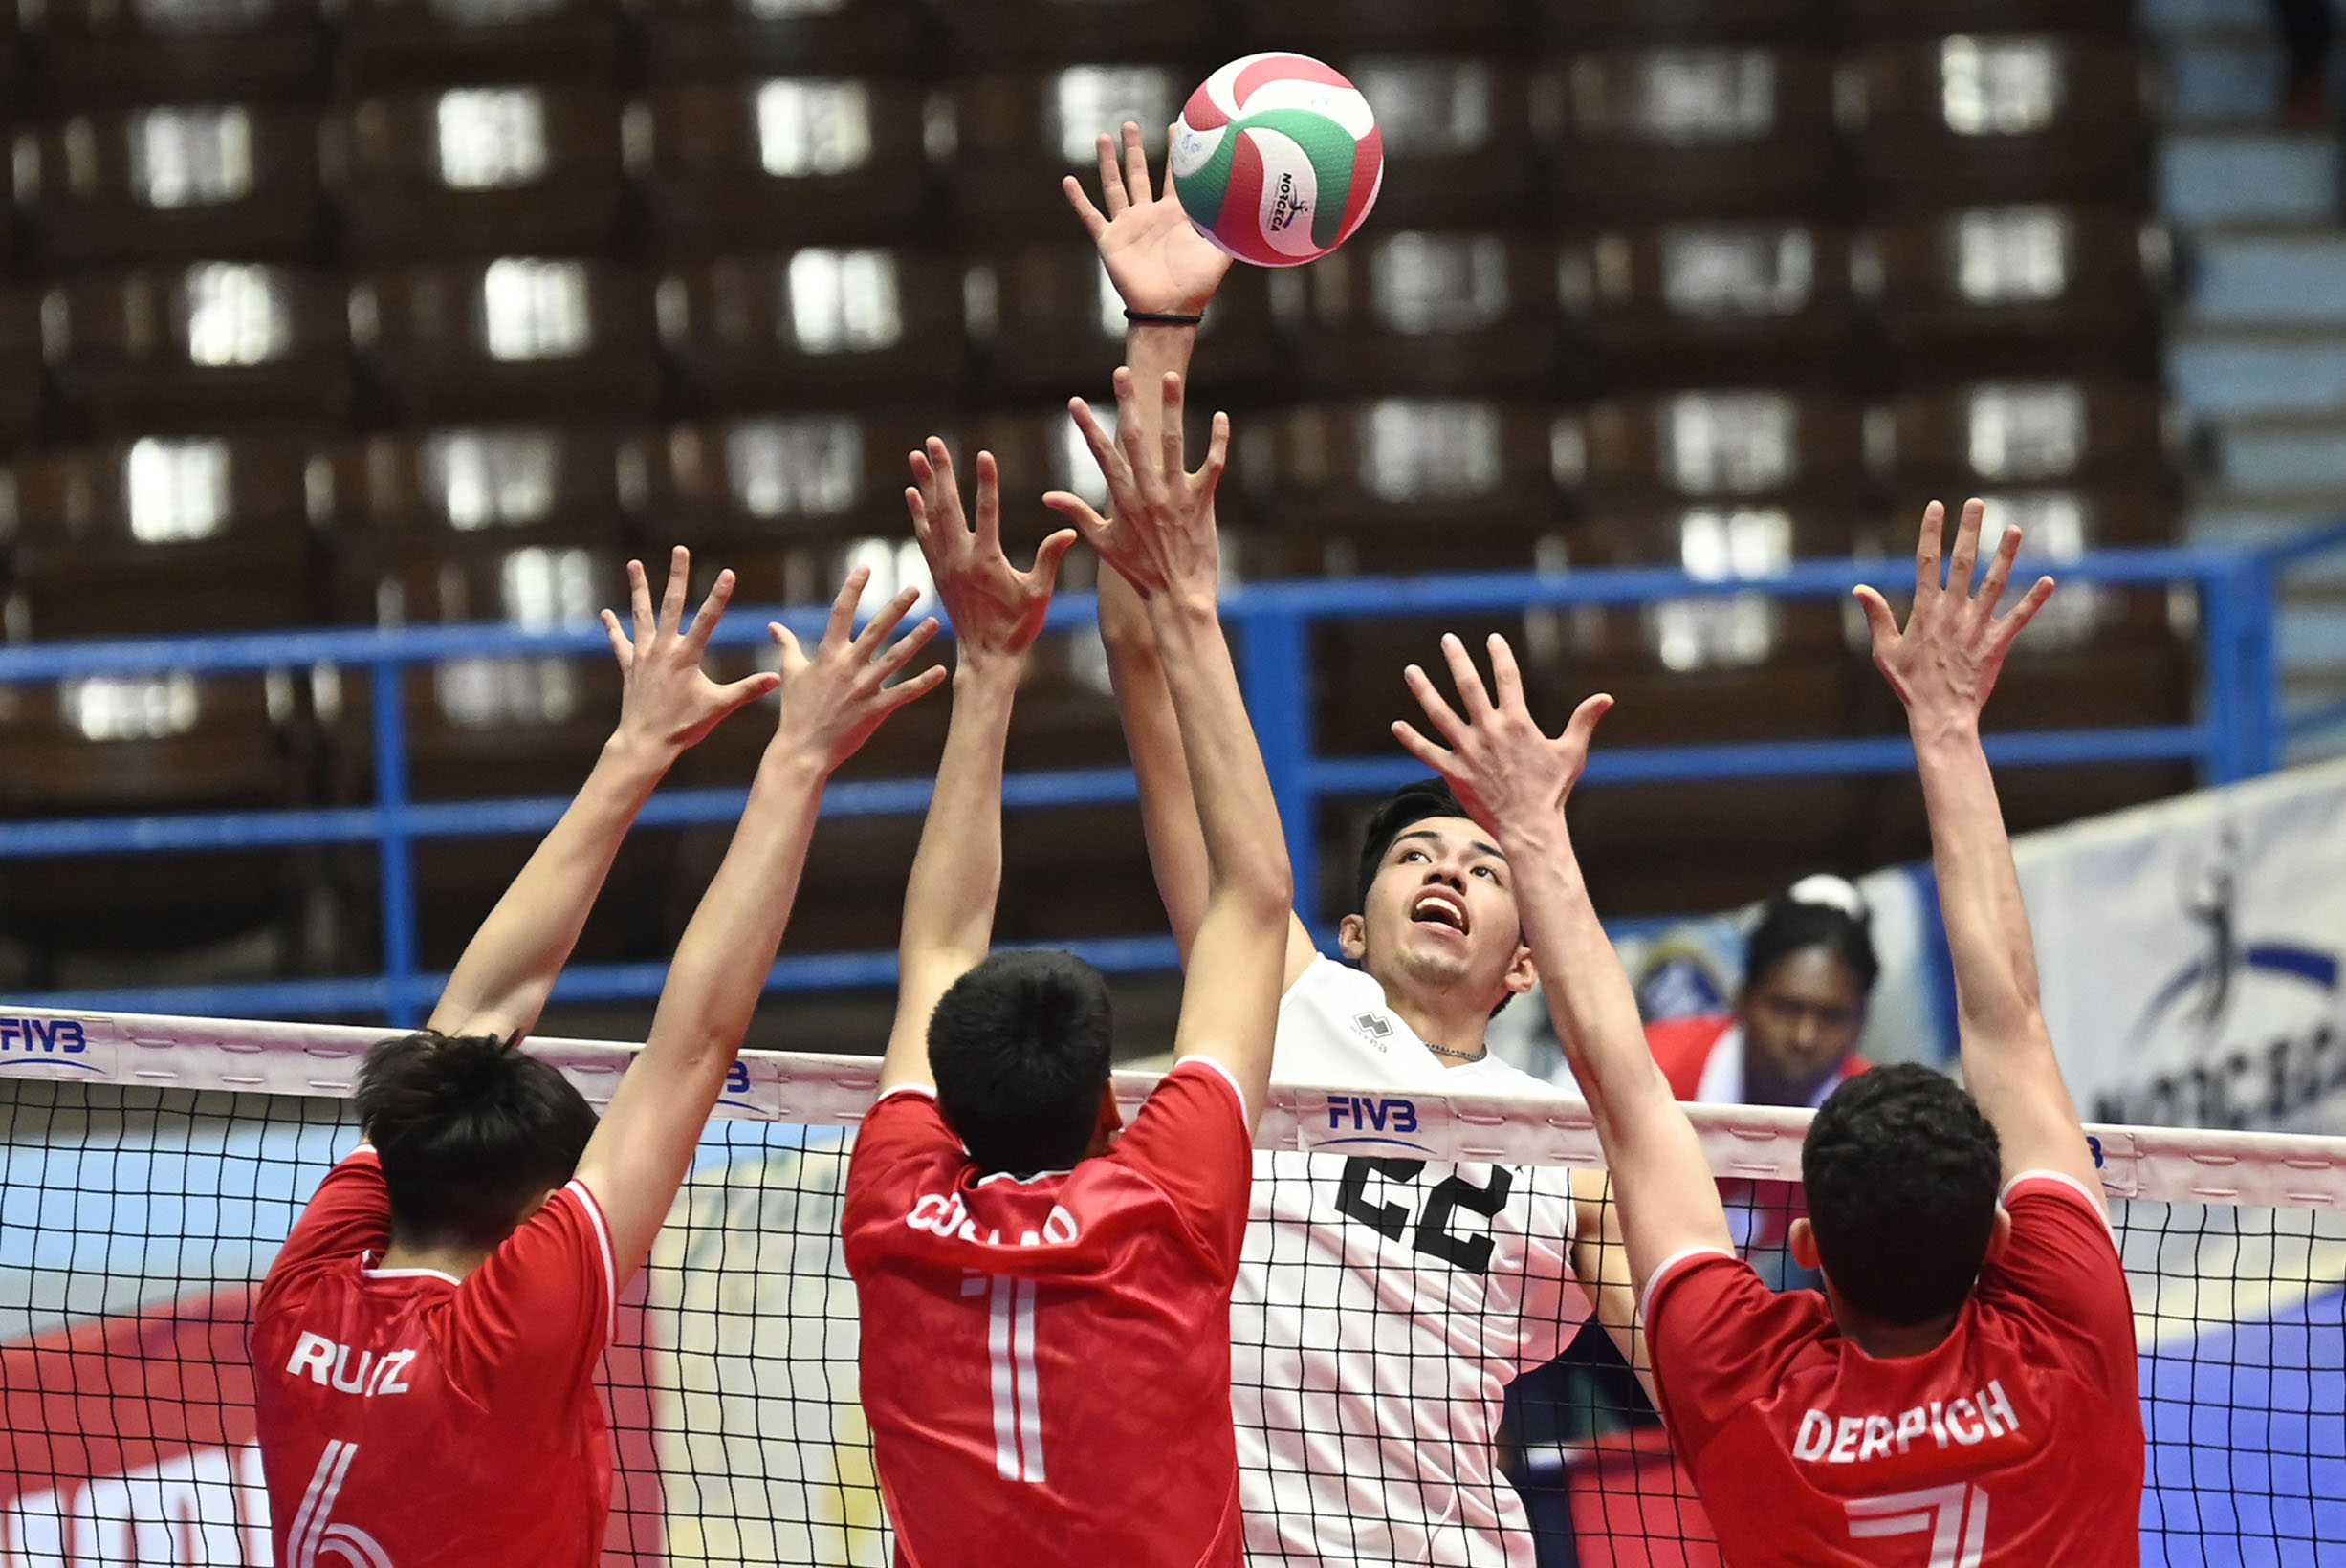 Mexico prevailed over Chile at U21 Pan American Cup